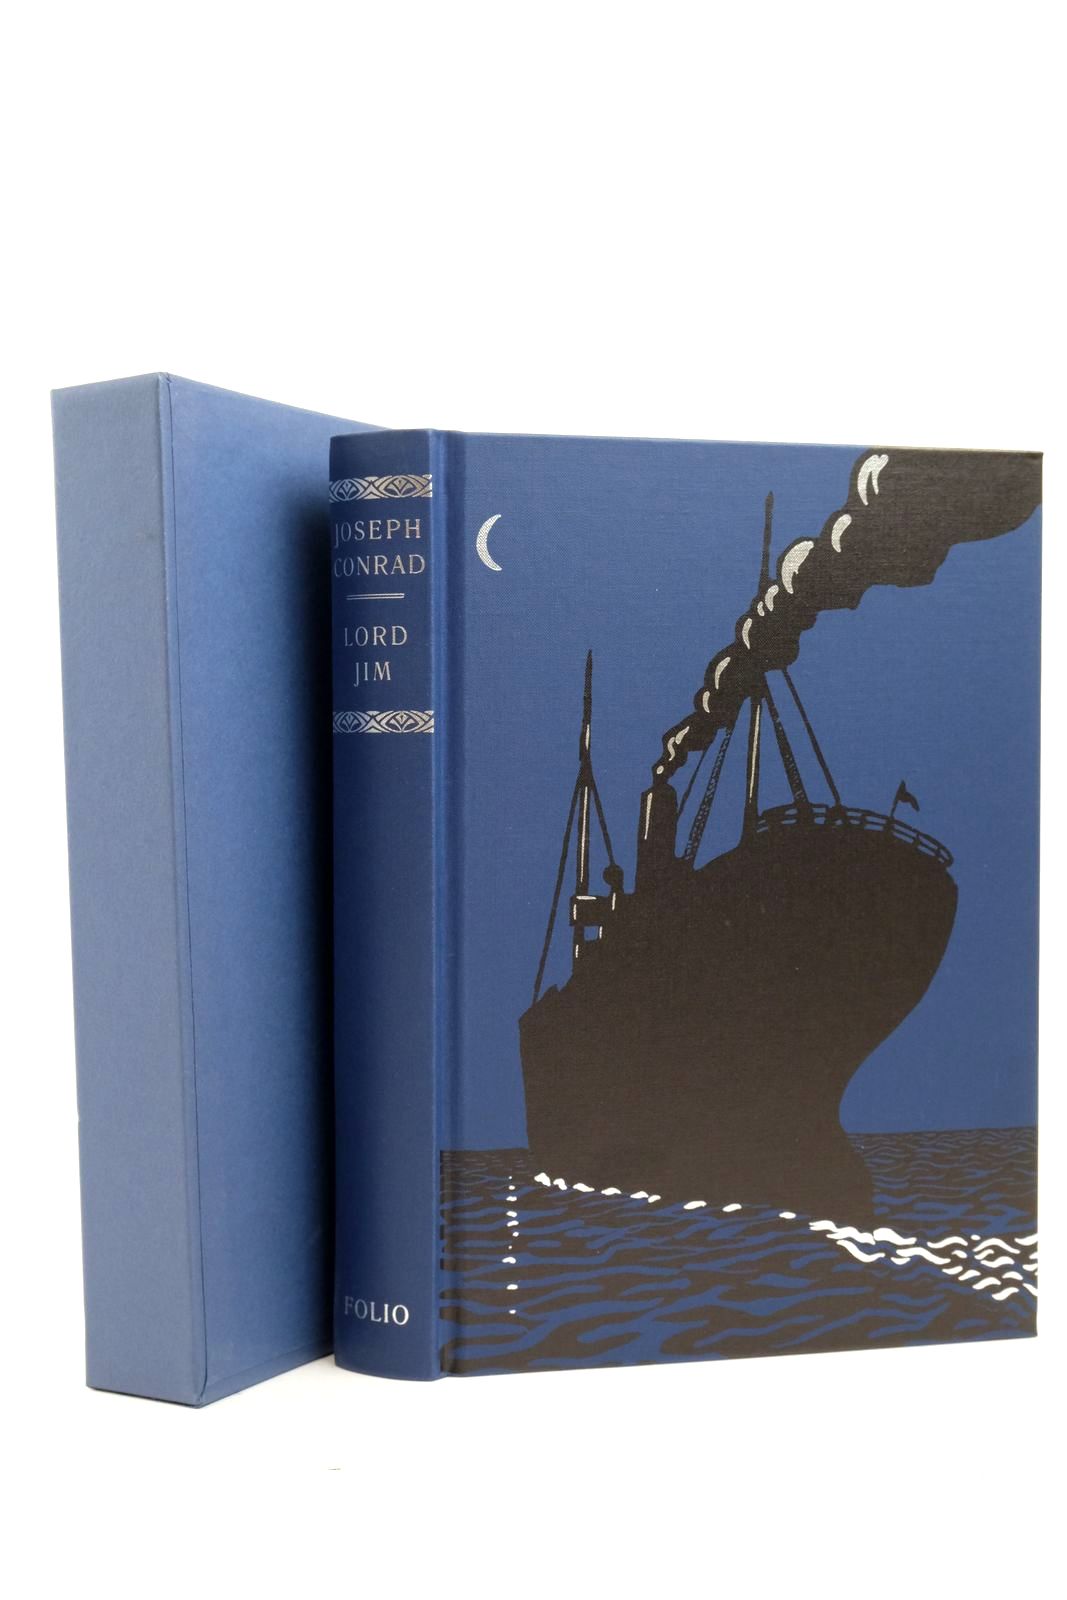 Photo of LORD JIM: A TALE written by Conrad, Joseph Young, Gavin illustrated by Mosley, Francis published by Folio Society (STOCK CODE: 2138293)  for sale by Stella & Rose's Books